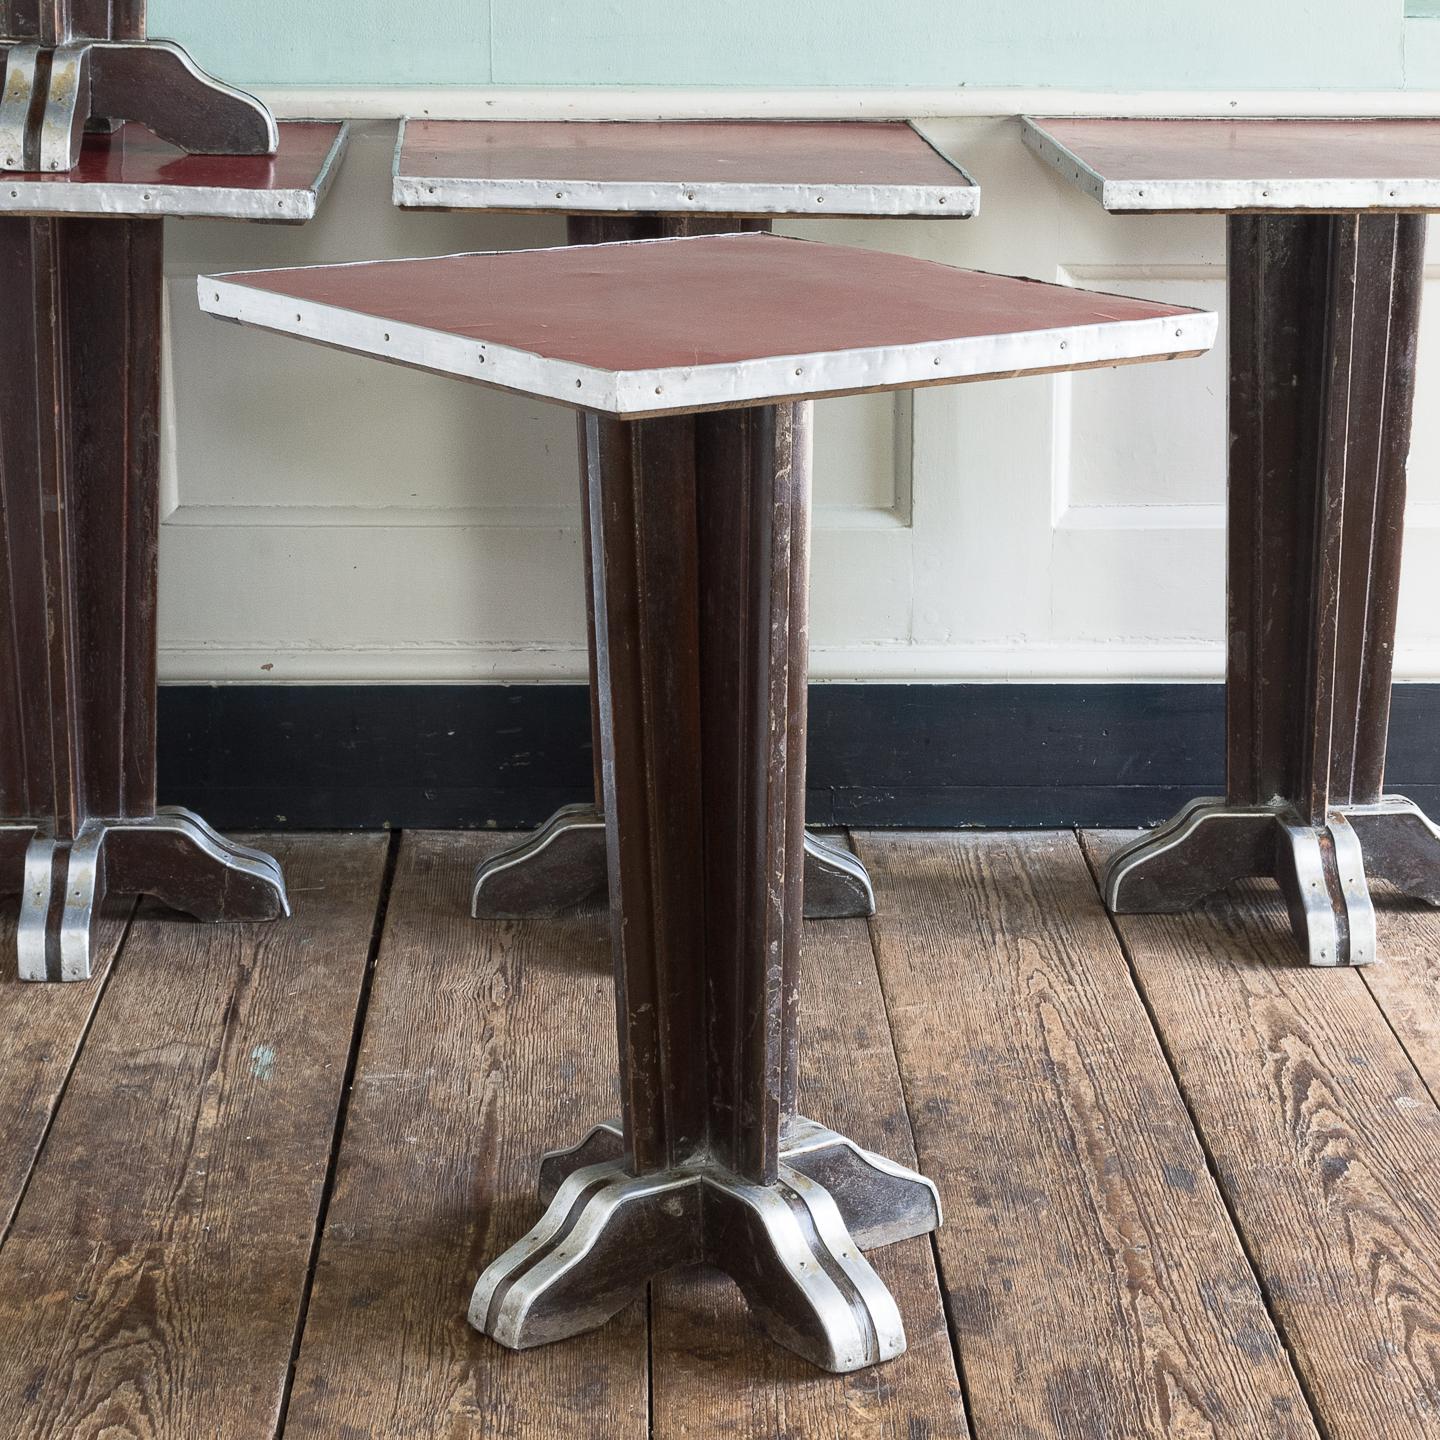 Three French Art Deco cafe tables, the red formica tops with aluminium edging on dark stained beechwood bases, with further aluminium details, in good usable condition, with expected marks and obvious wear.